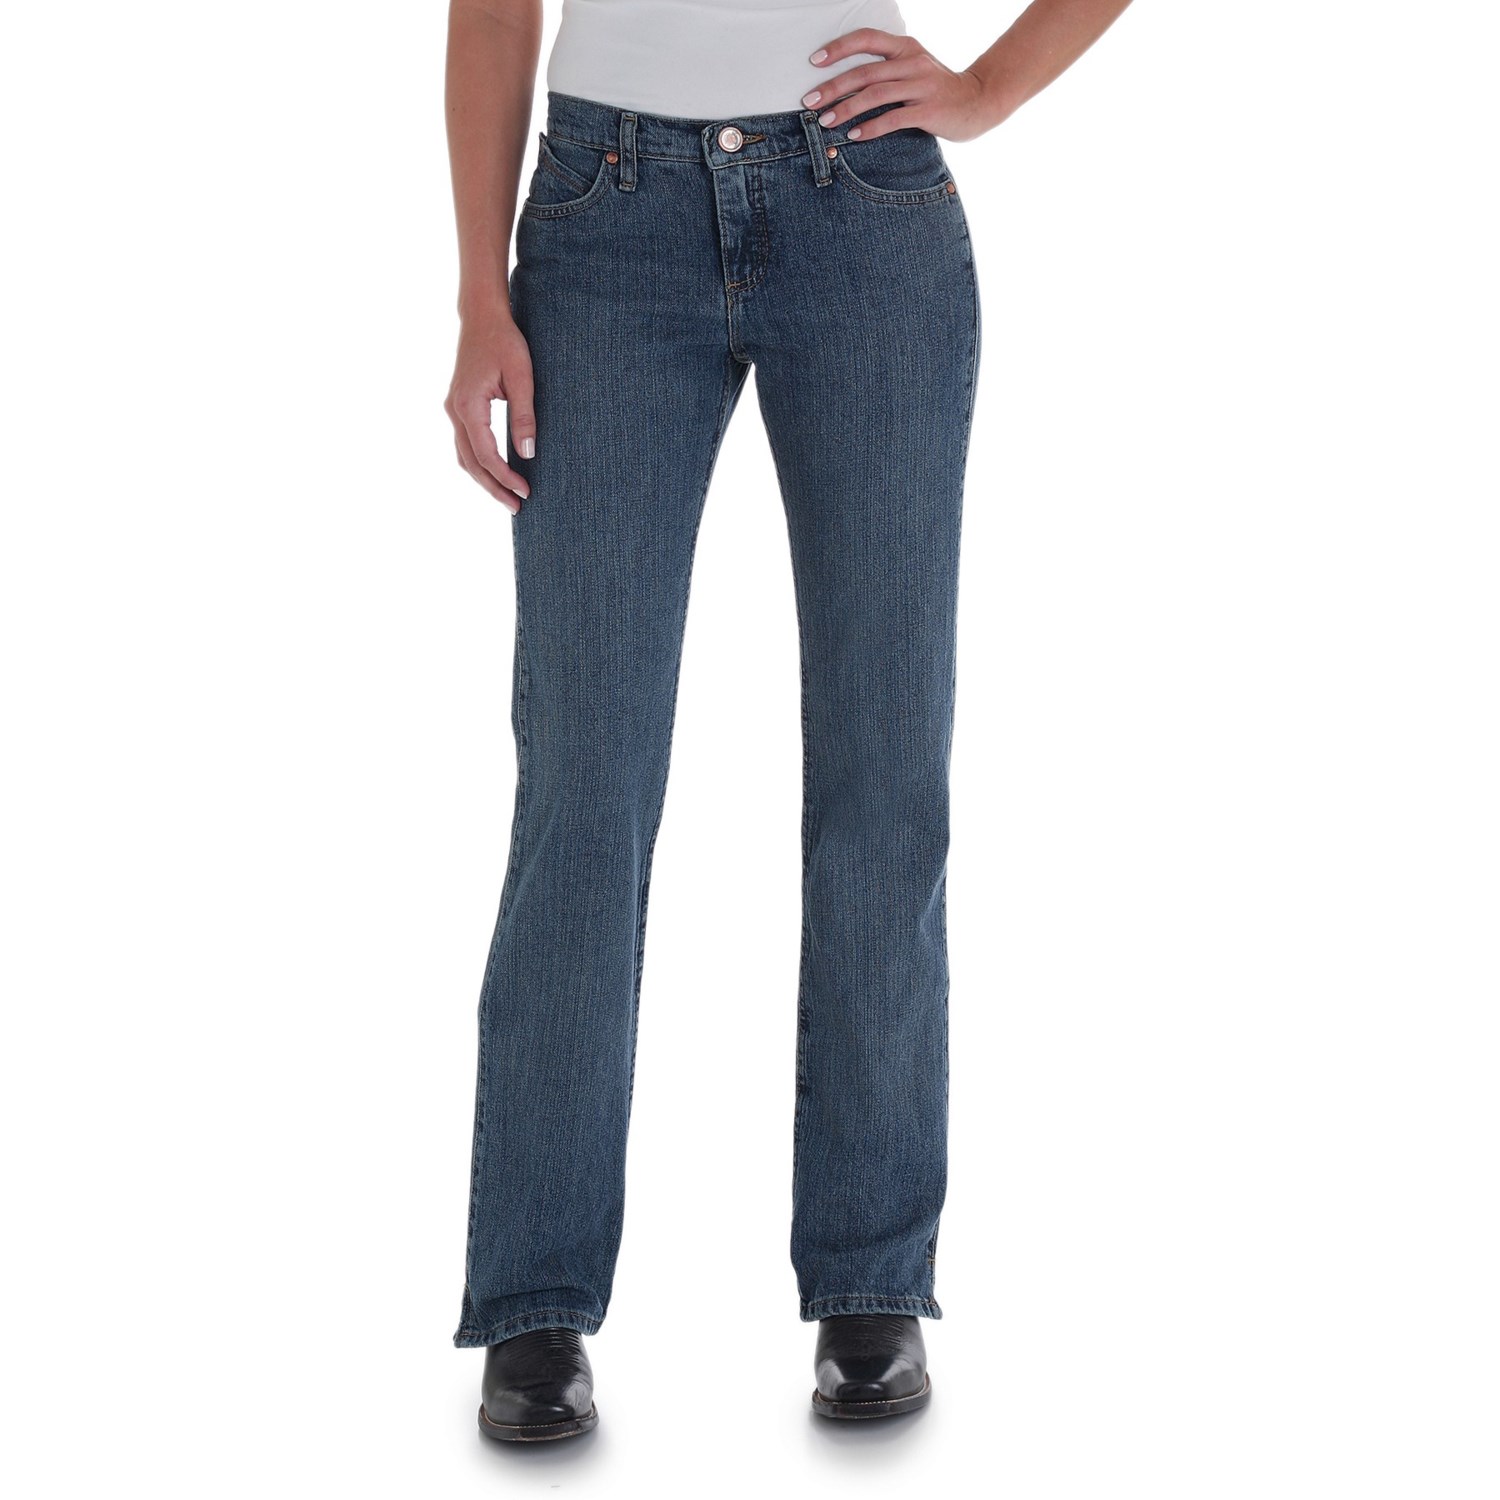 Wrangler Cash Ultimate Riding Jeans (For Women) - Save 59%